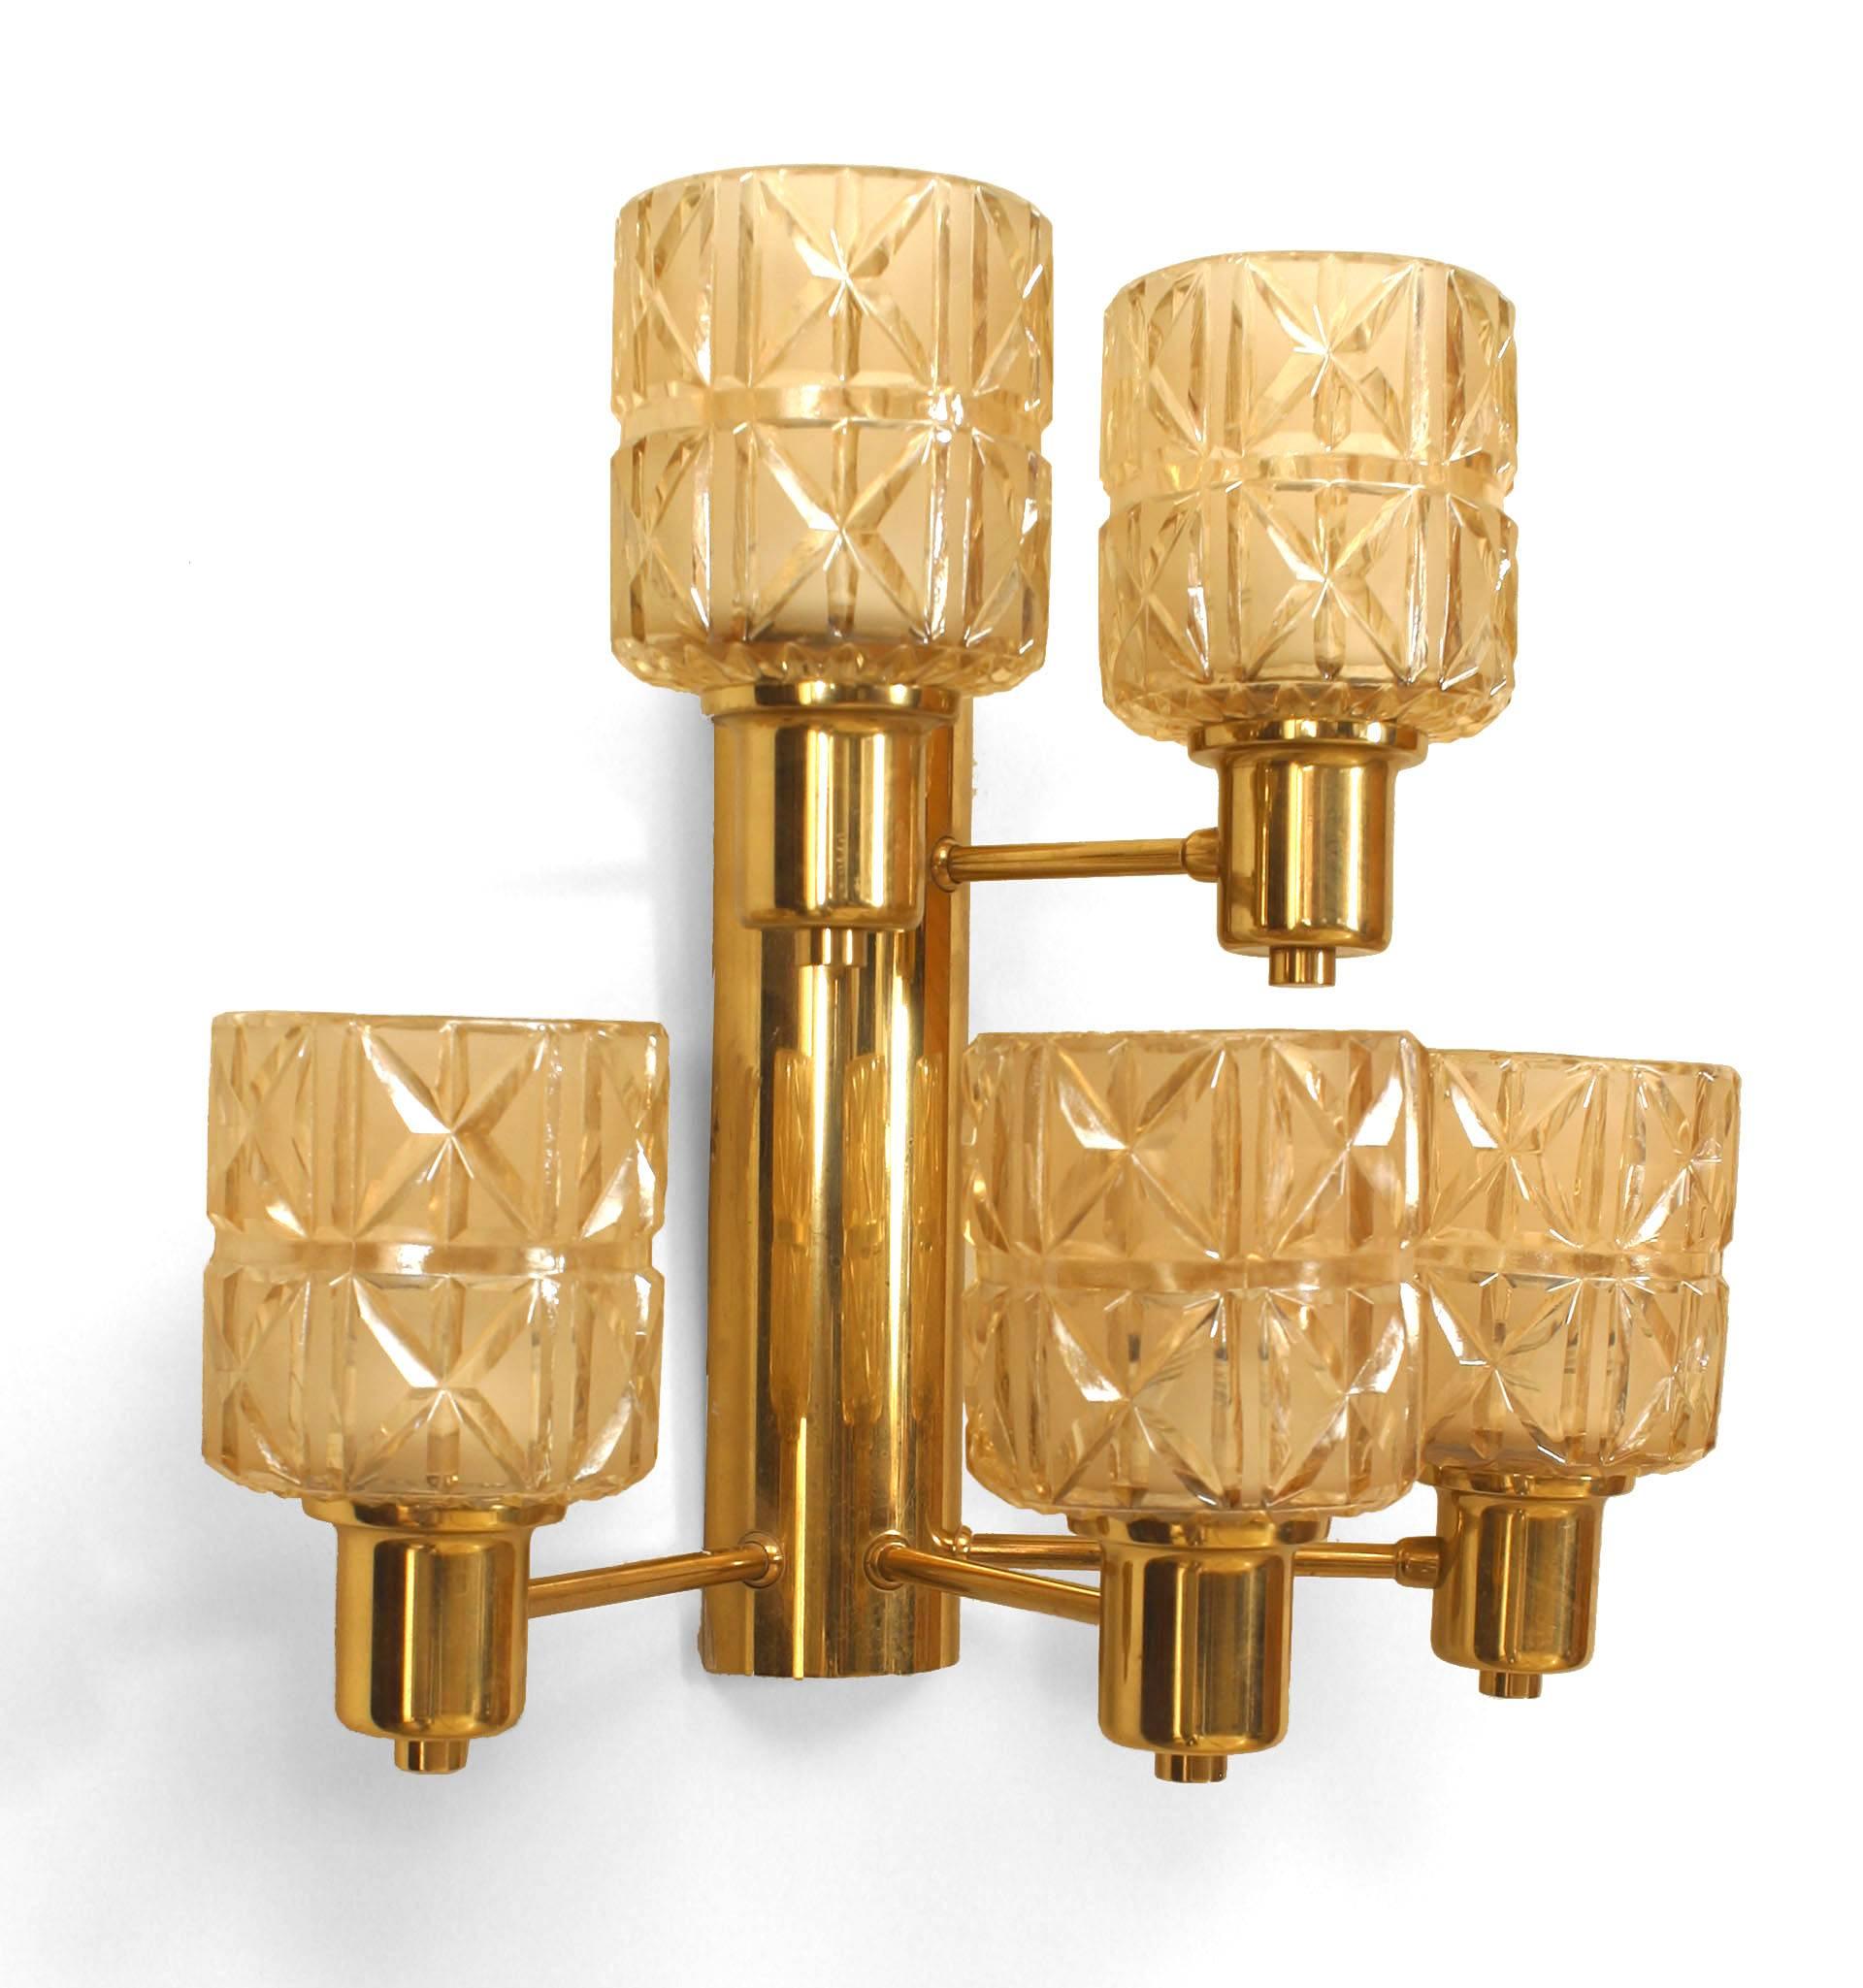 Pair of Hans Agne Jakobsen Swedish Mid-Century Brass and Glass Wall Sconces In Good Condition For Sale In New York, NY